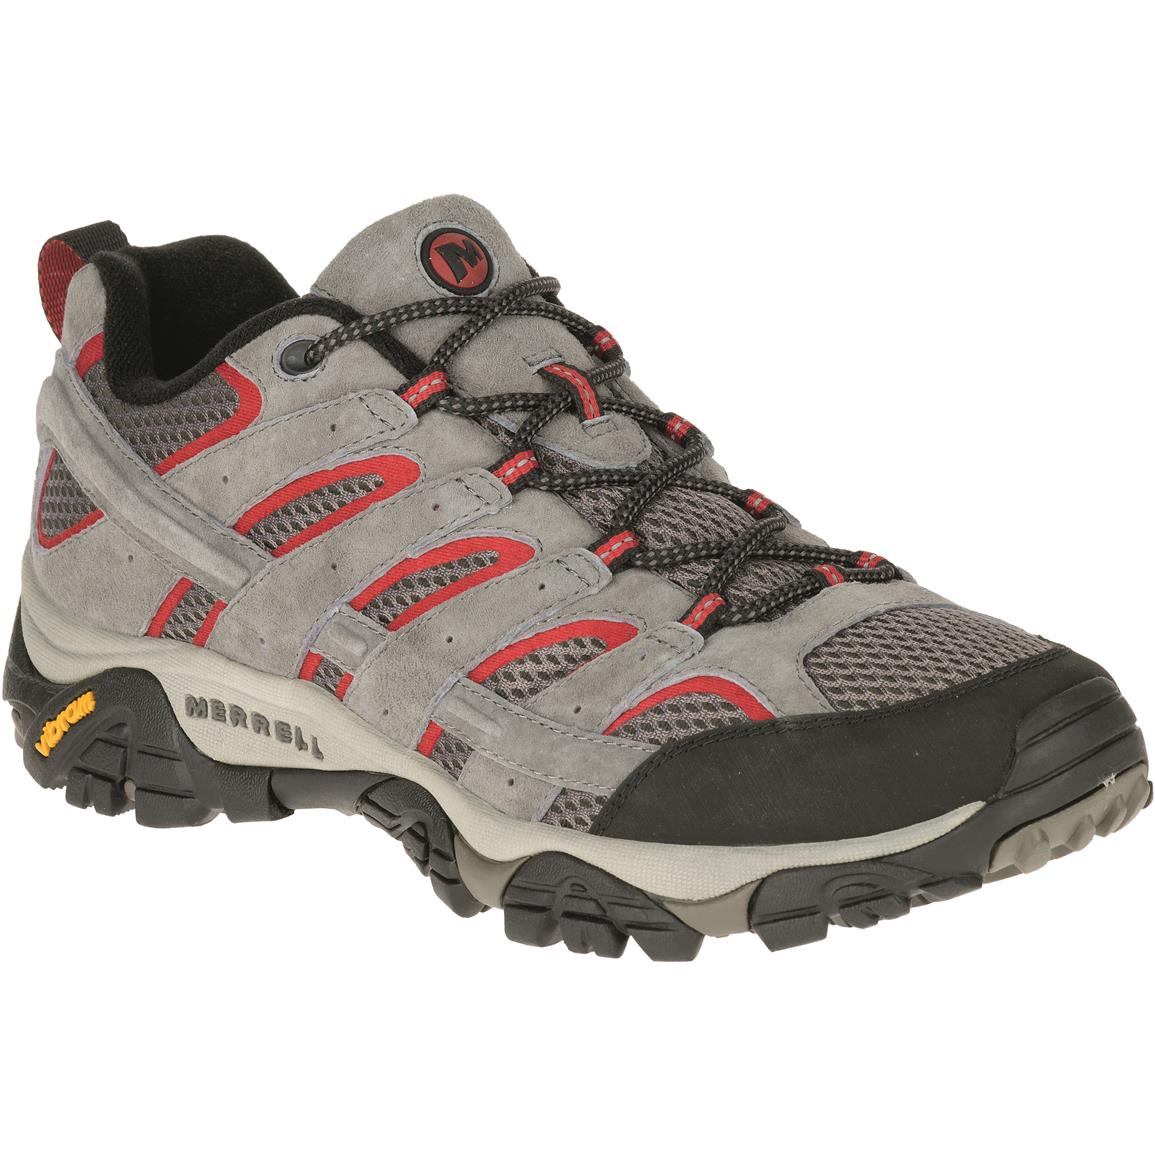 Merrell Men's Moab 2 Vent Hiking Shoes - 690254, Hiking Boots & Shoes ...